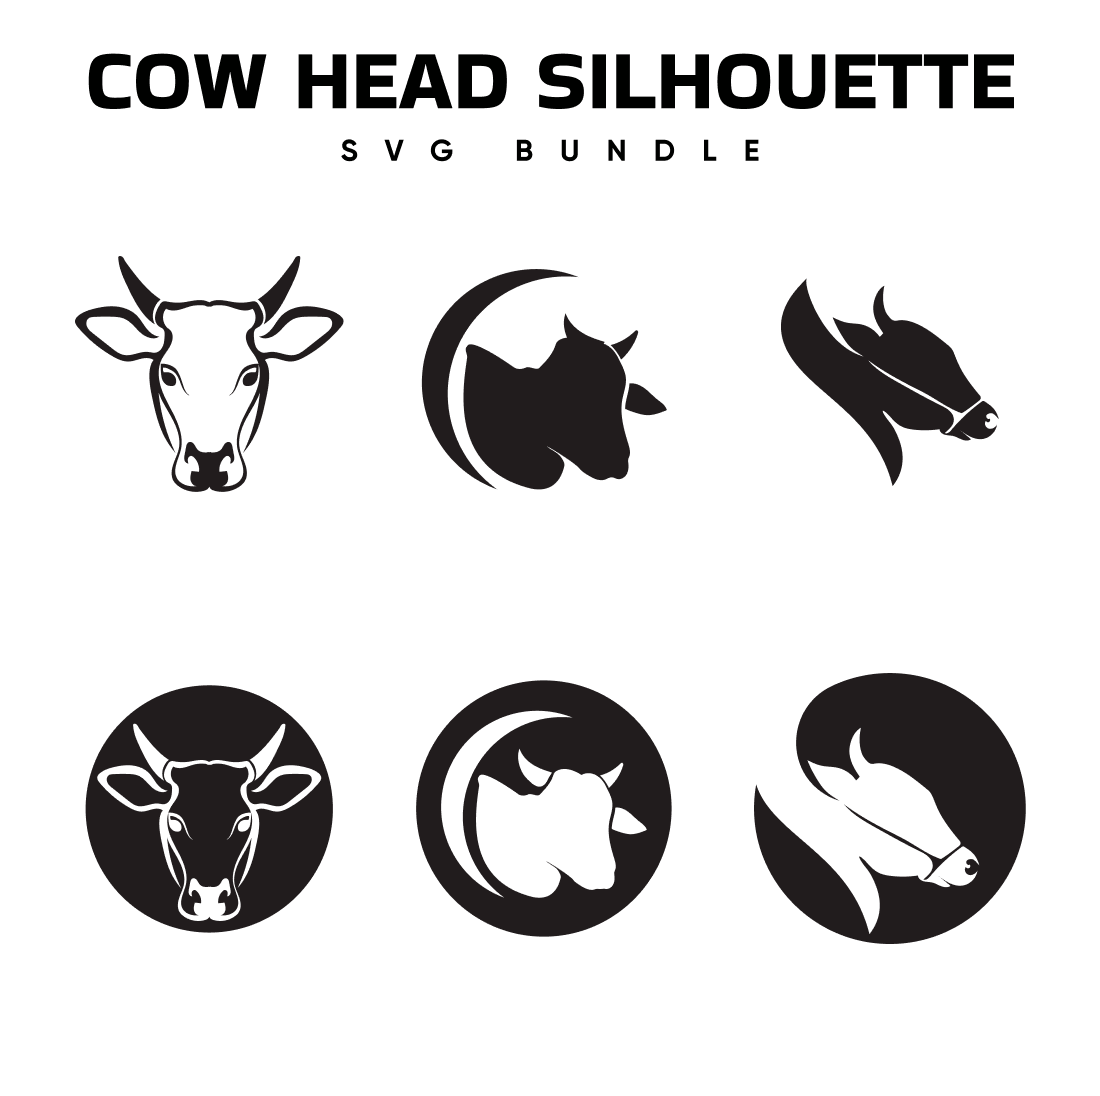 Collection of cow head silhouettes on a white background.